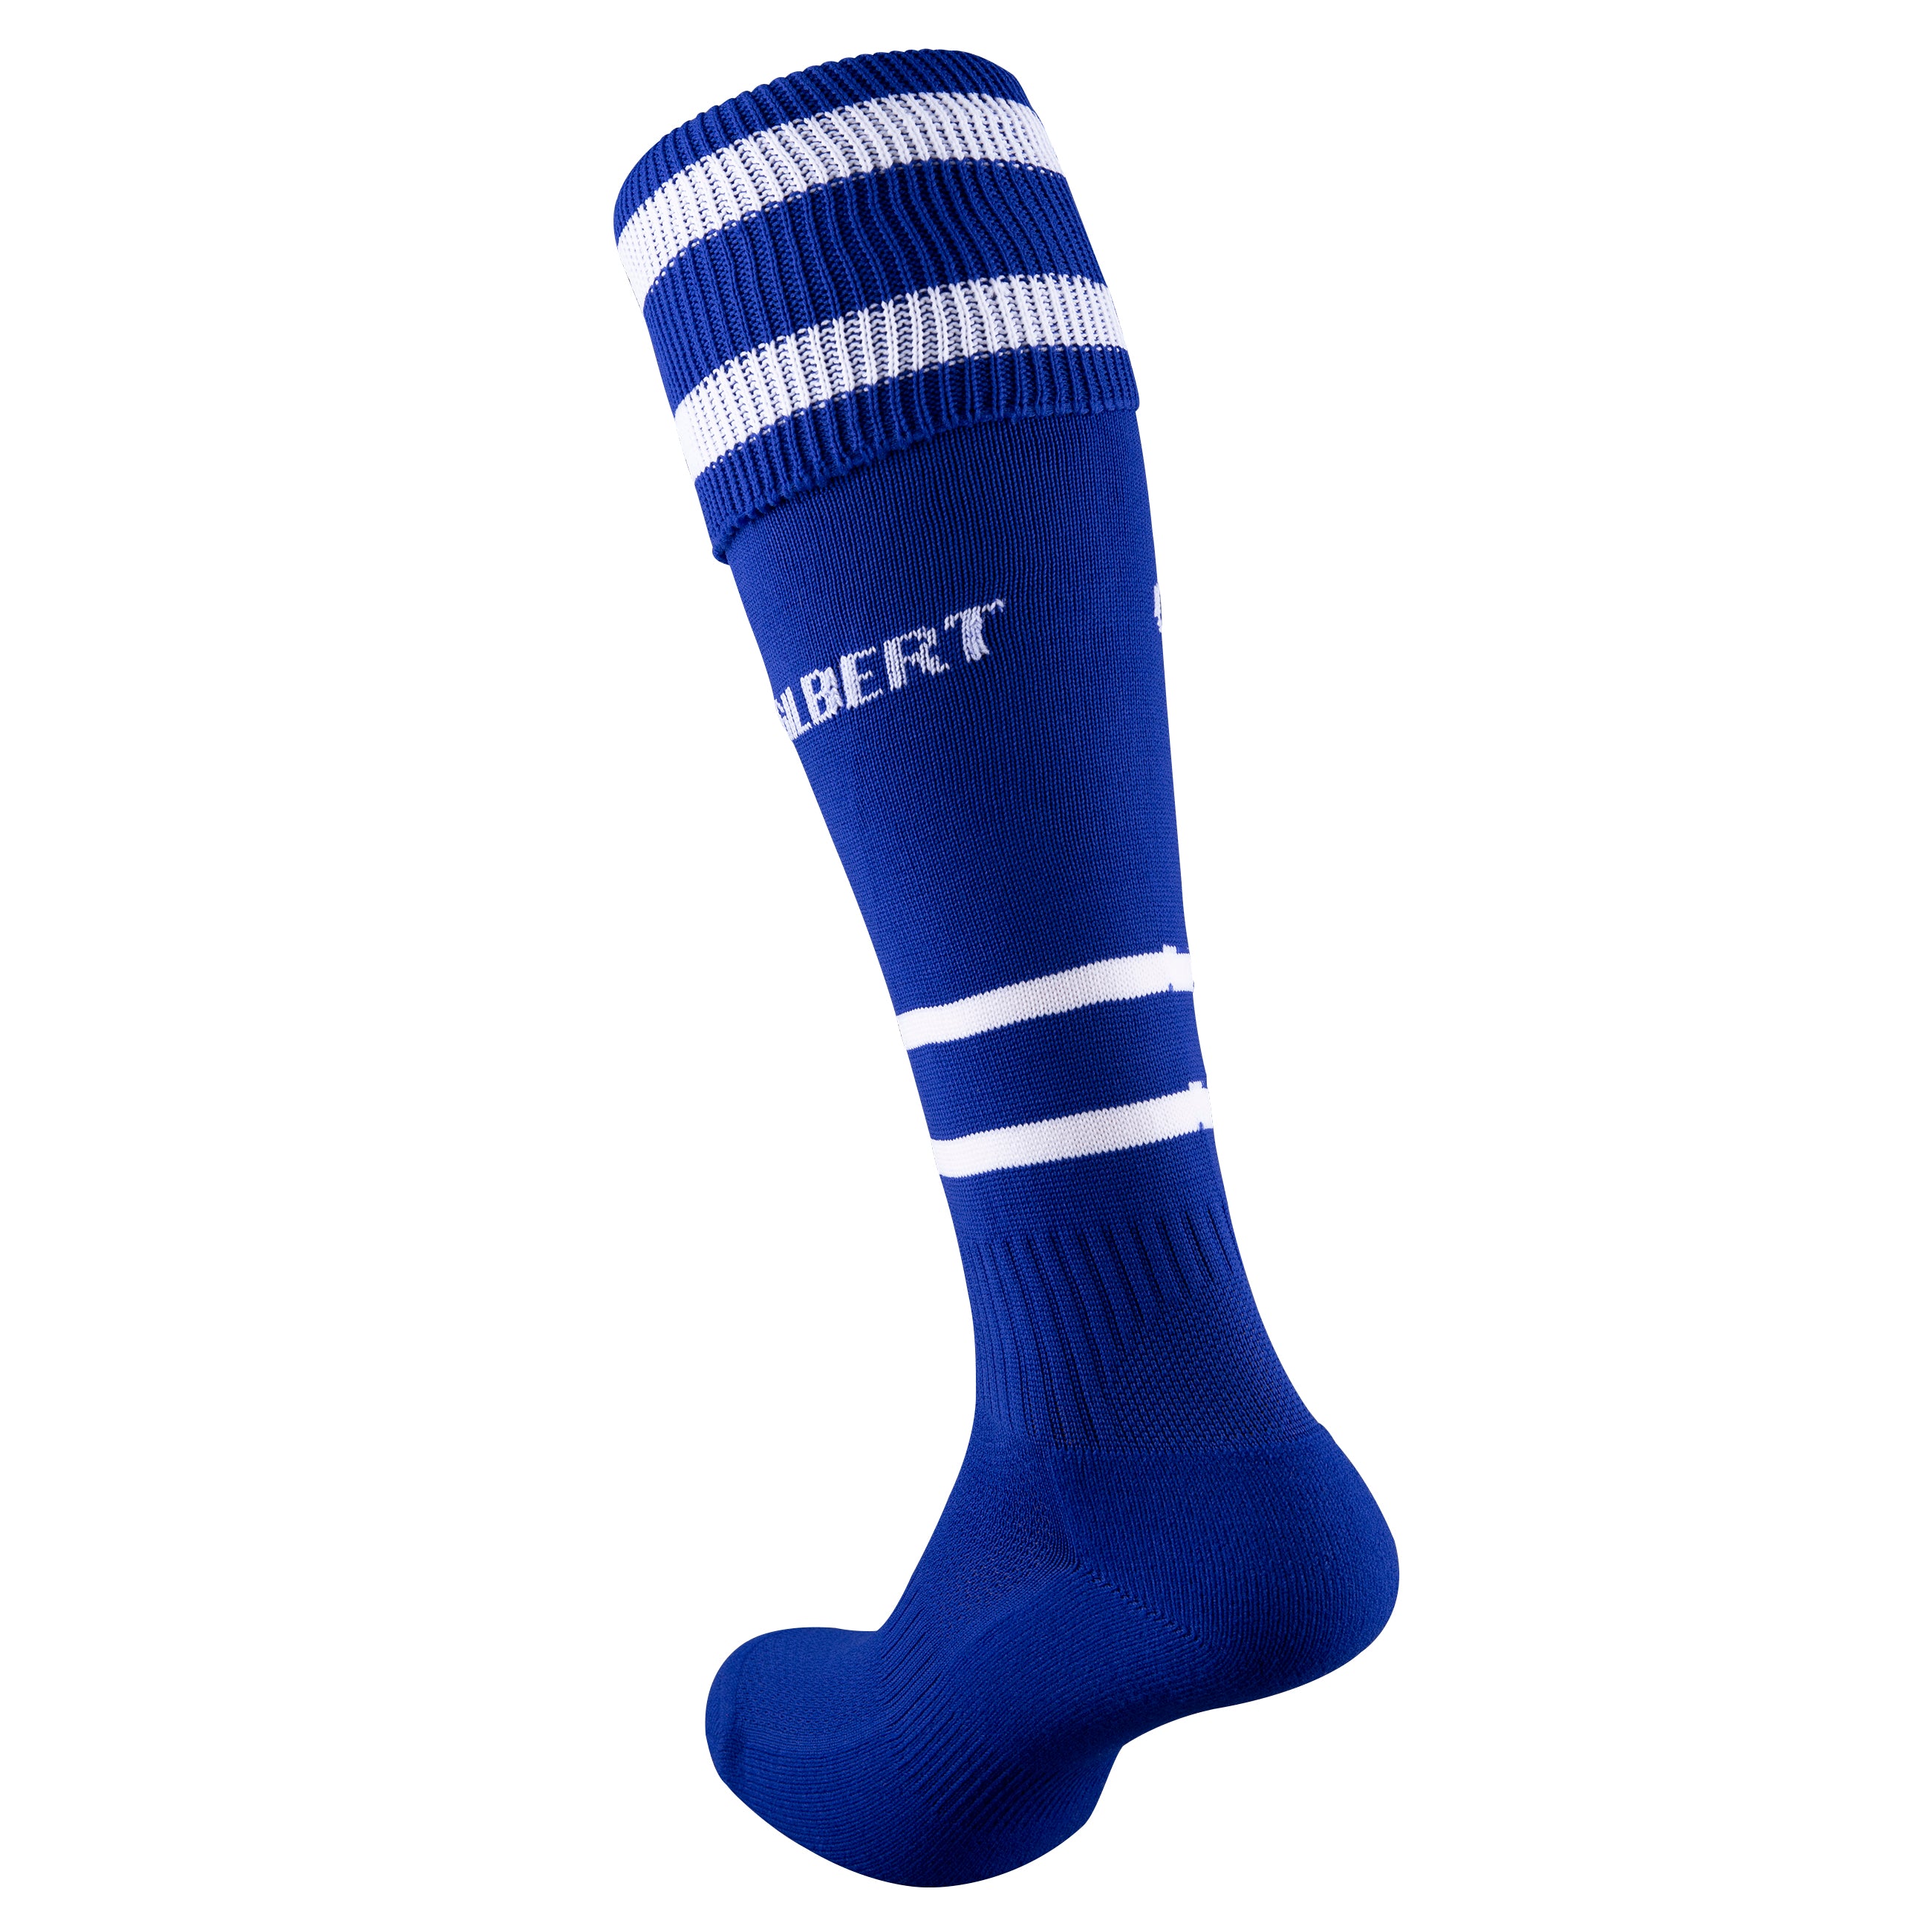 Rugby Training Sock. Socks made for rugby | Gilbert Rugby